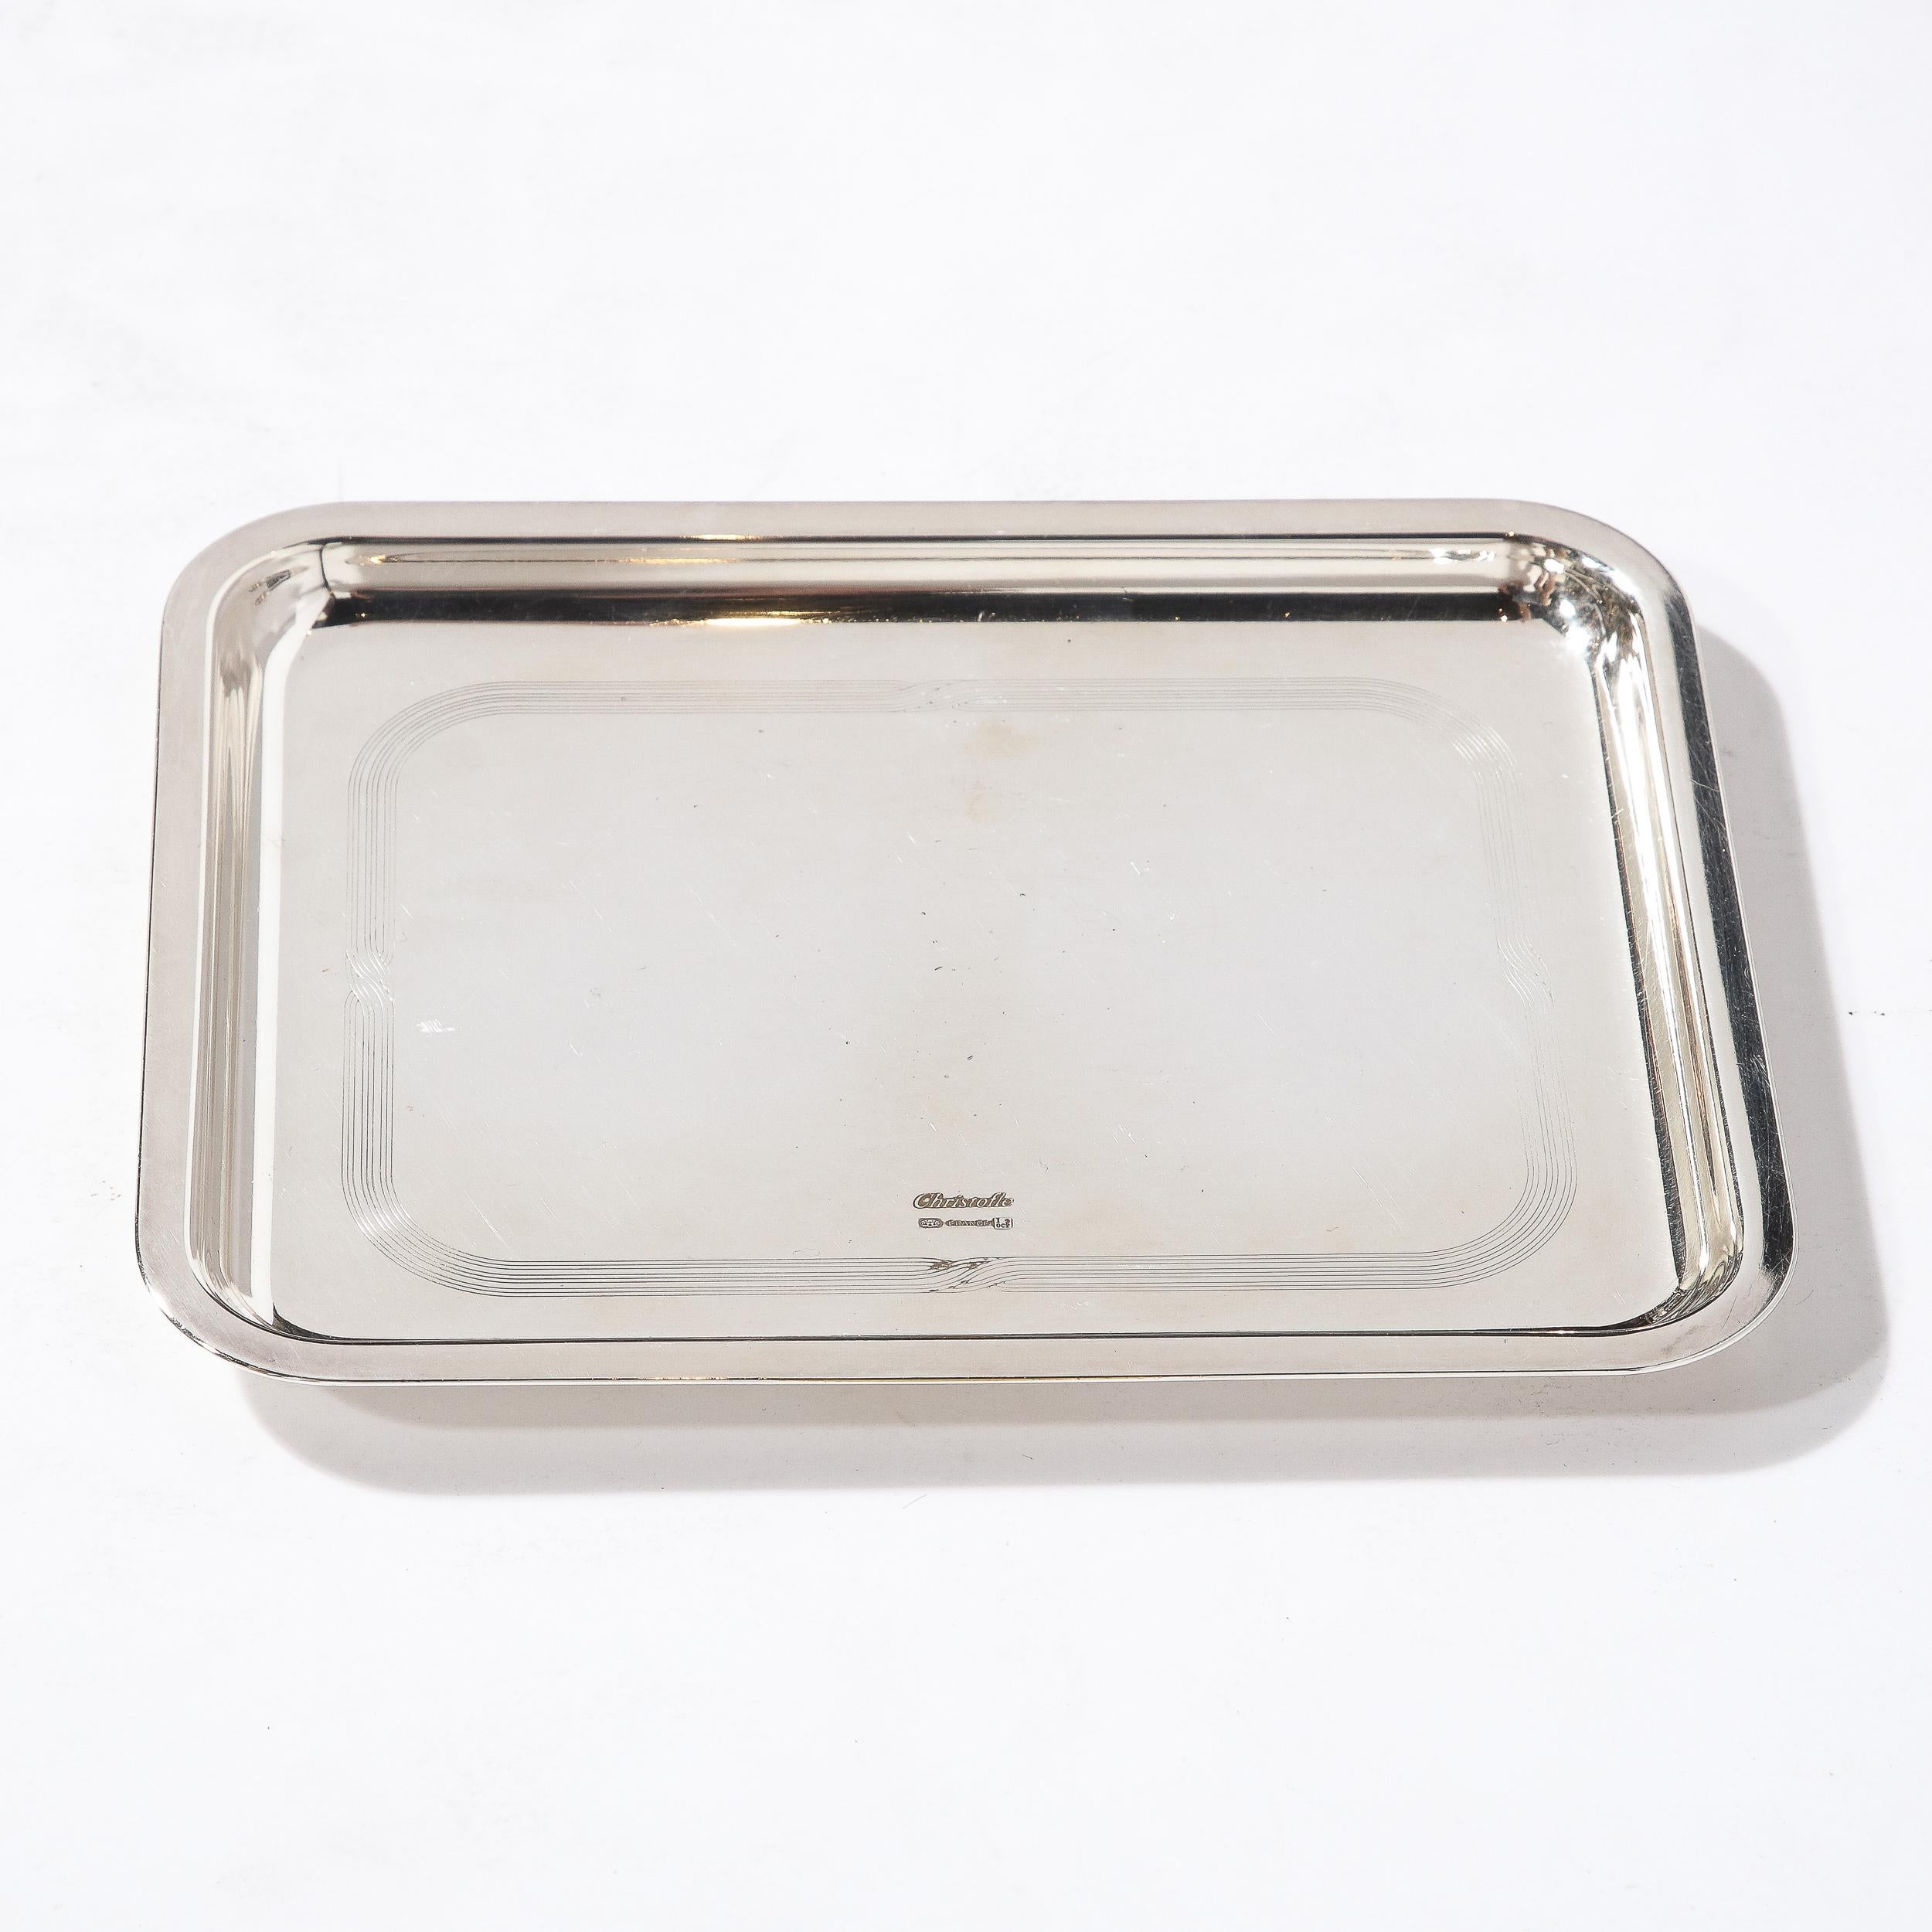 A beautiful silver plated tray by the French house of Christofle. This center of the plate is beautifully engraved with a pattern of interwoven ribbons. Ideal for stylish serving of guests, or purely for decoration. The tray is marked Christofle